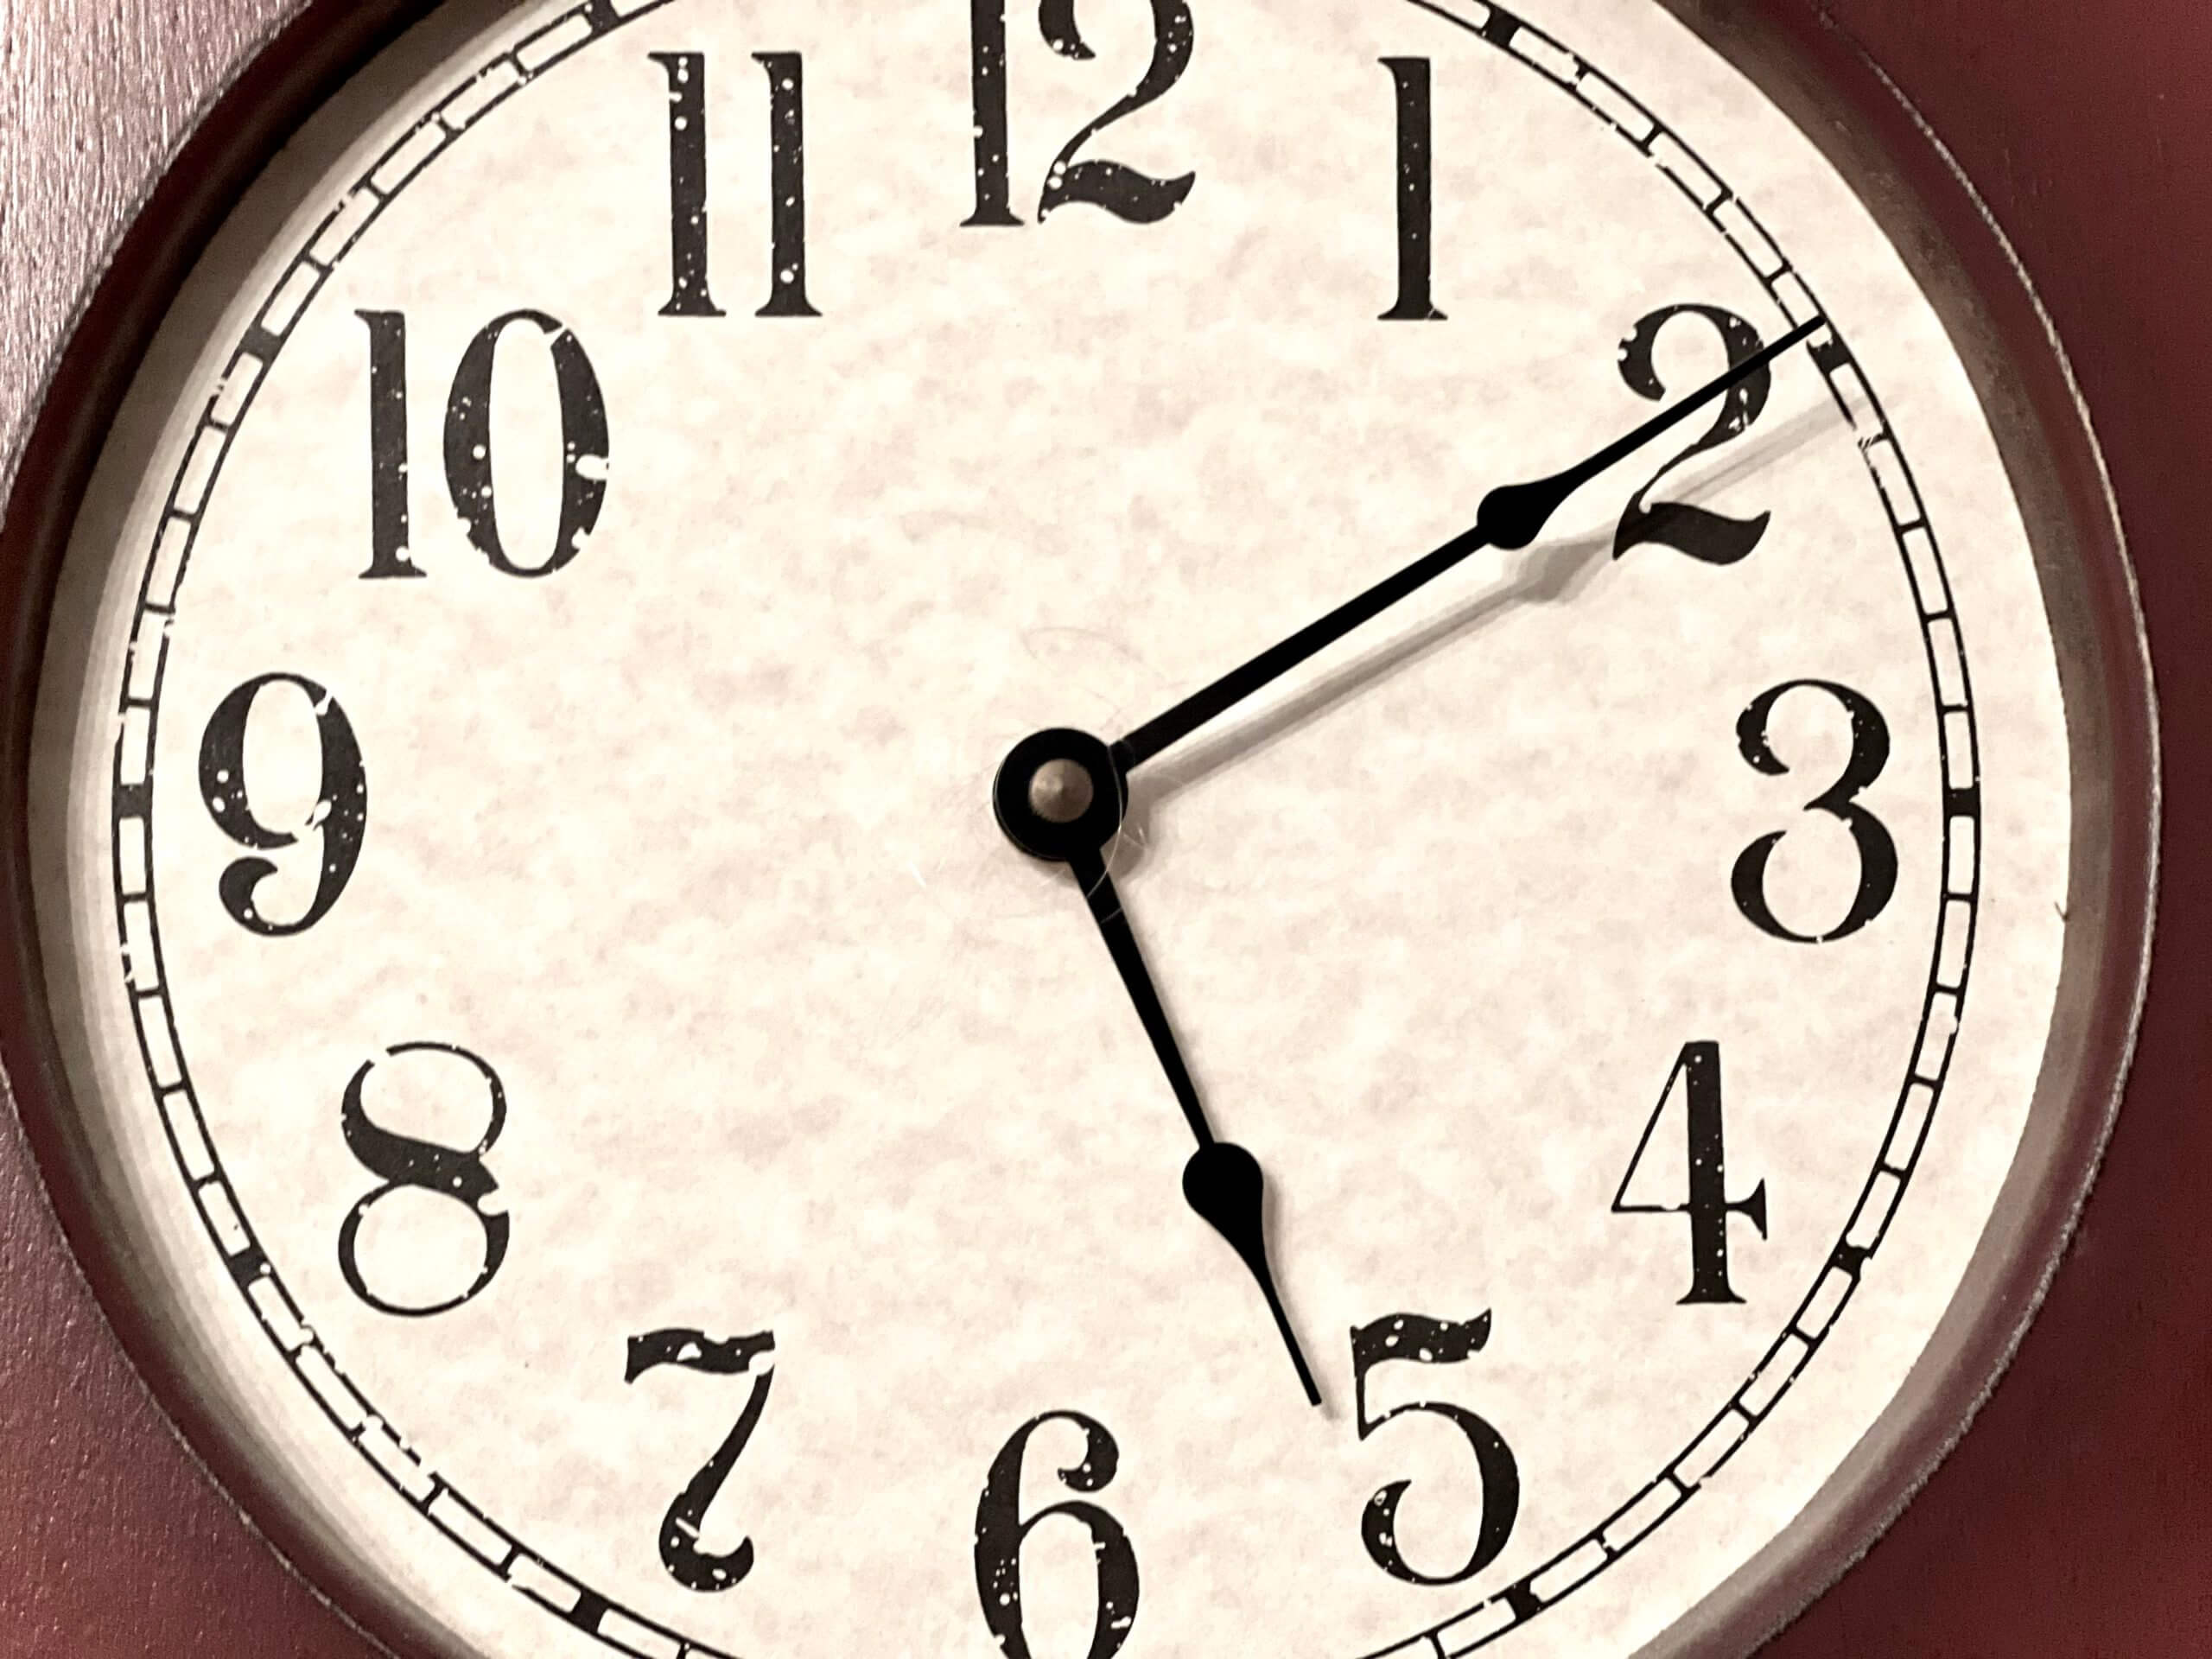 Close-up image of an analog clock that reads 5:10.